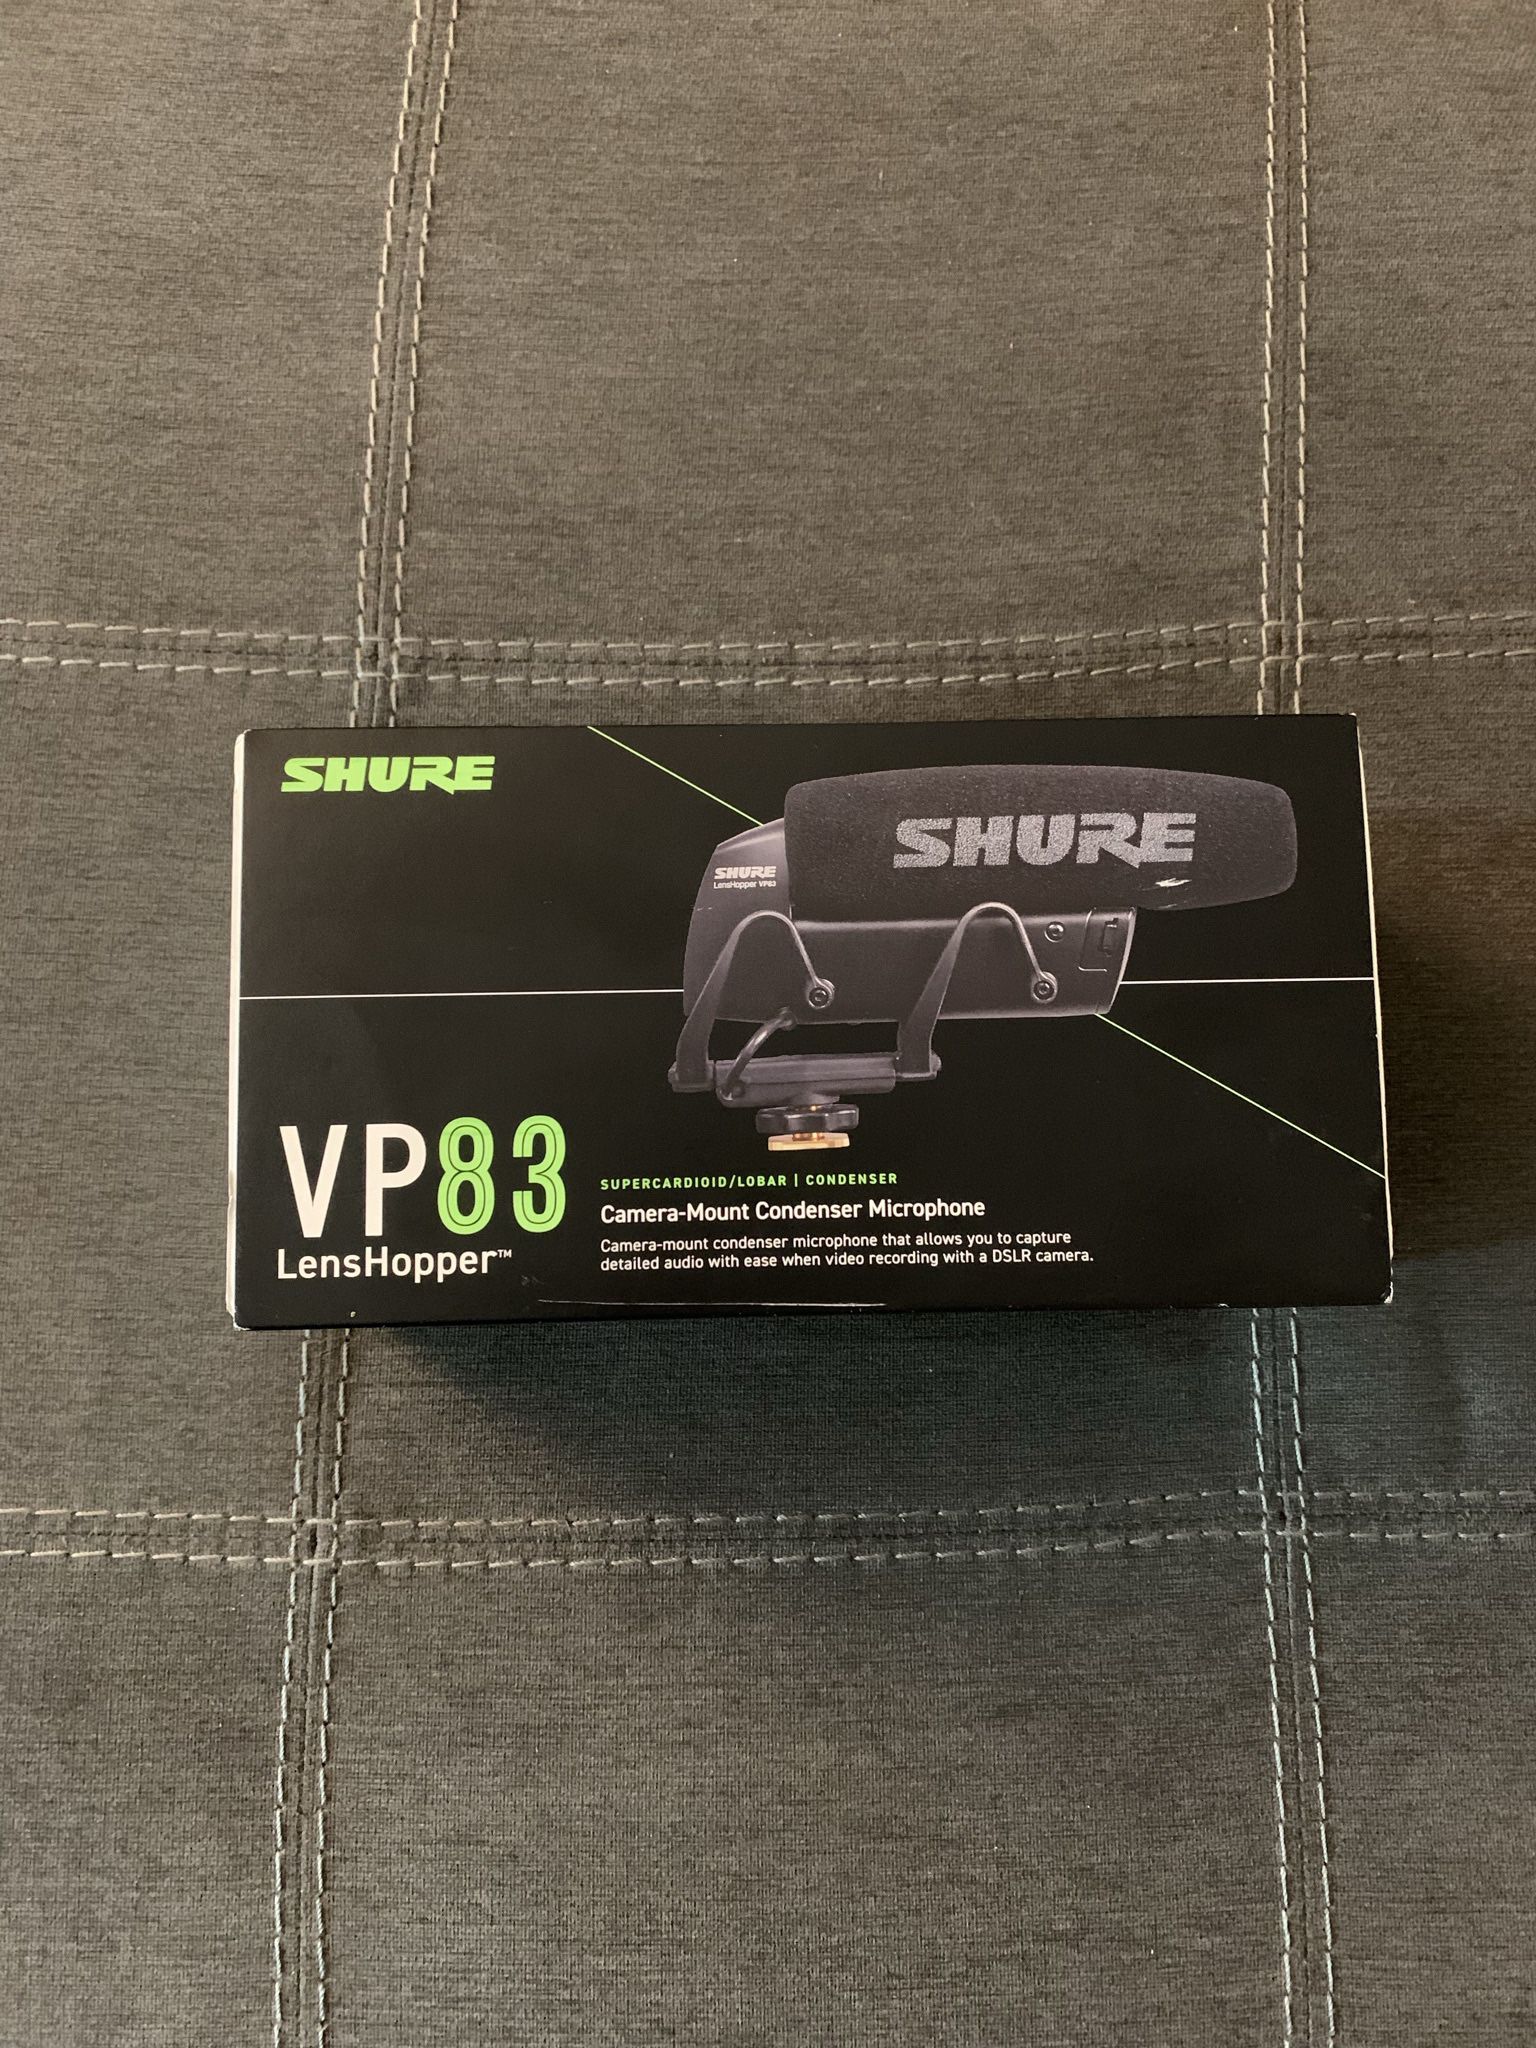 Shure VP83 condenser microphone for DSLR Cameras and HD Camcorders 